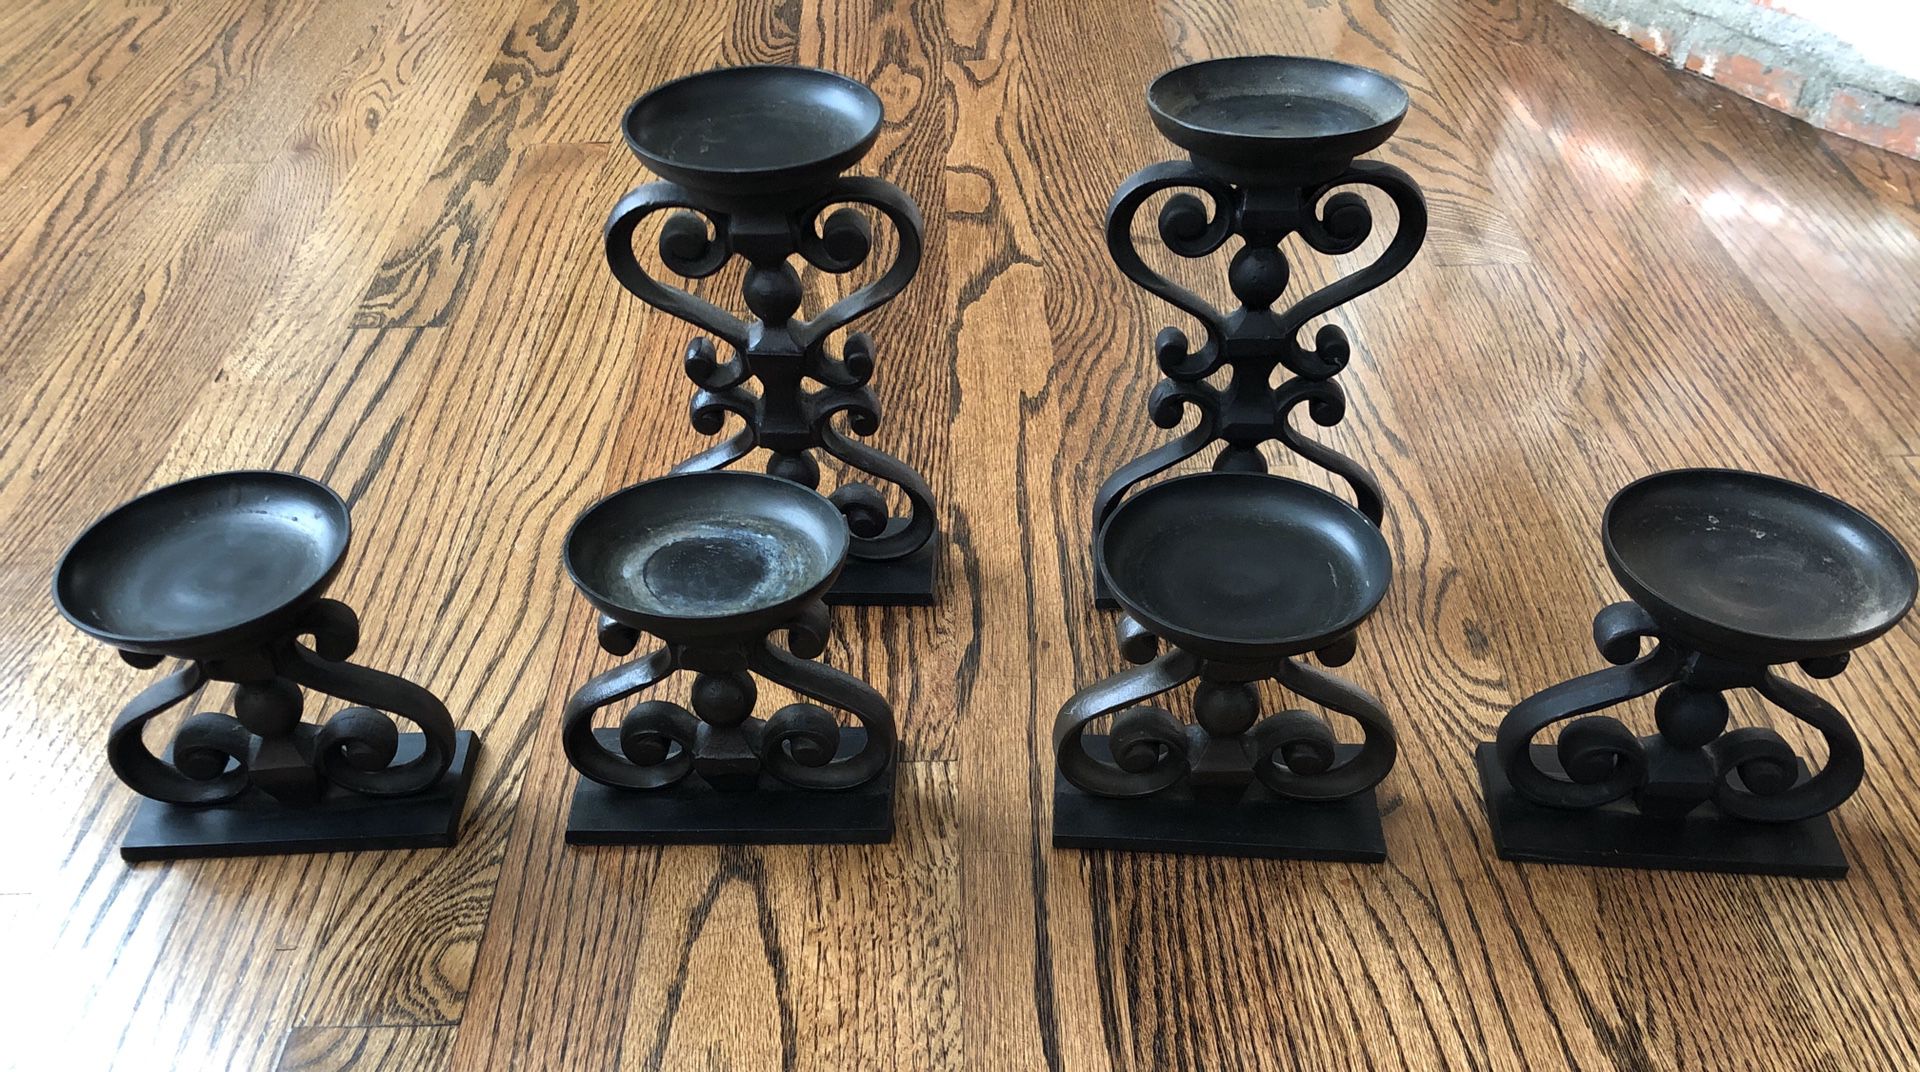 4" & 9" Pottery Barn Scrolly Pillar Candle Holders Wrought Iron Black